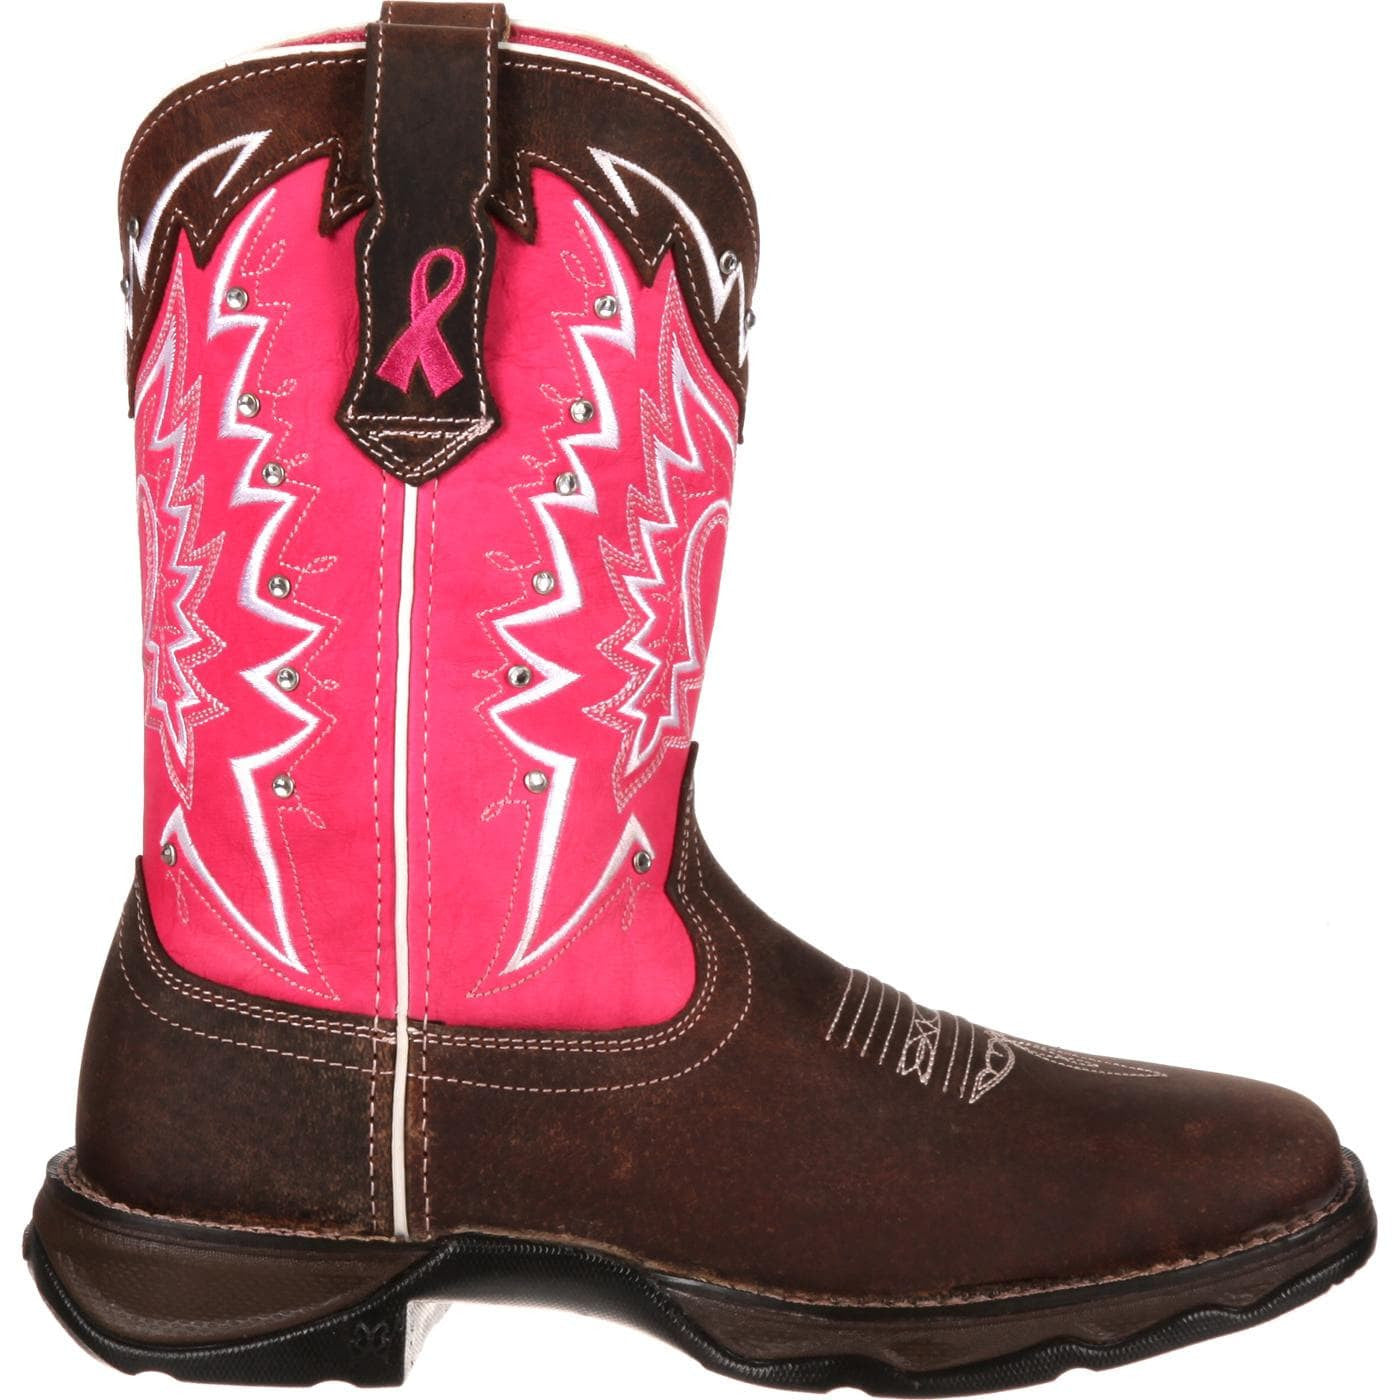 Durango Ladies Pink Ribbon Breast Cancer Awareness Boots RD3557 - Wild West Boot Store - 2